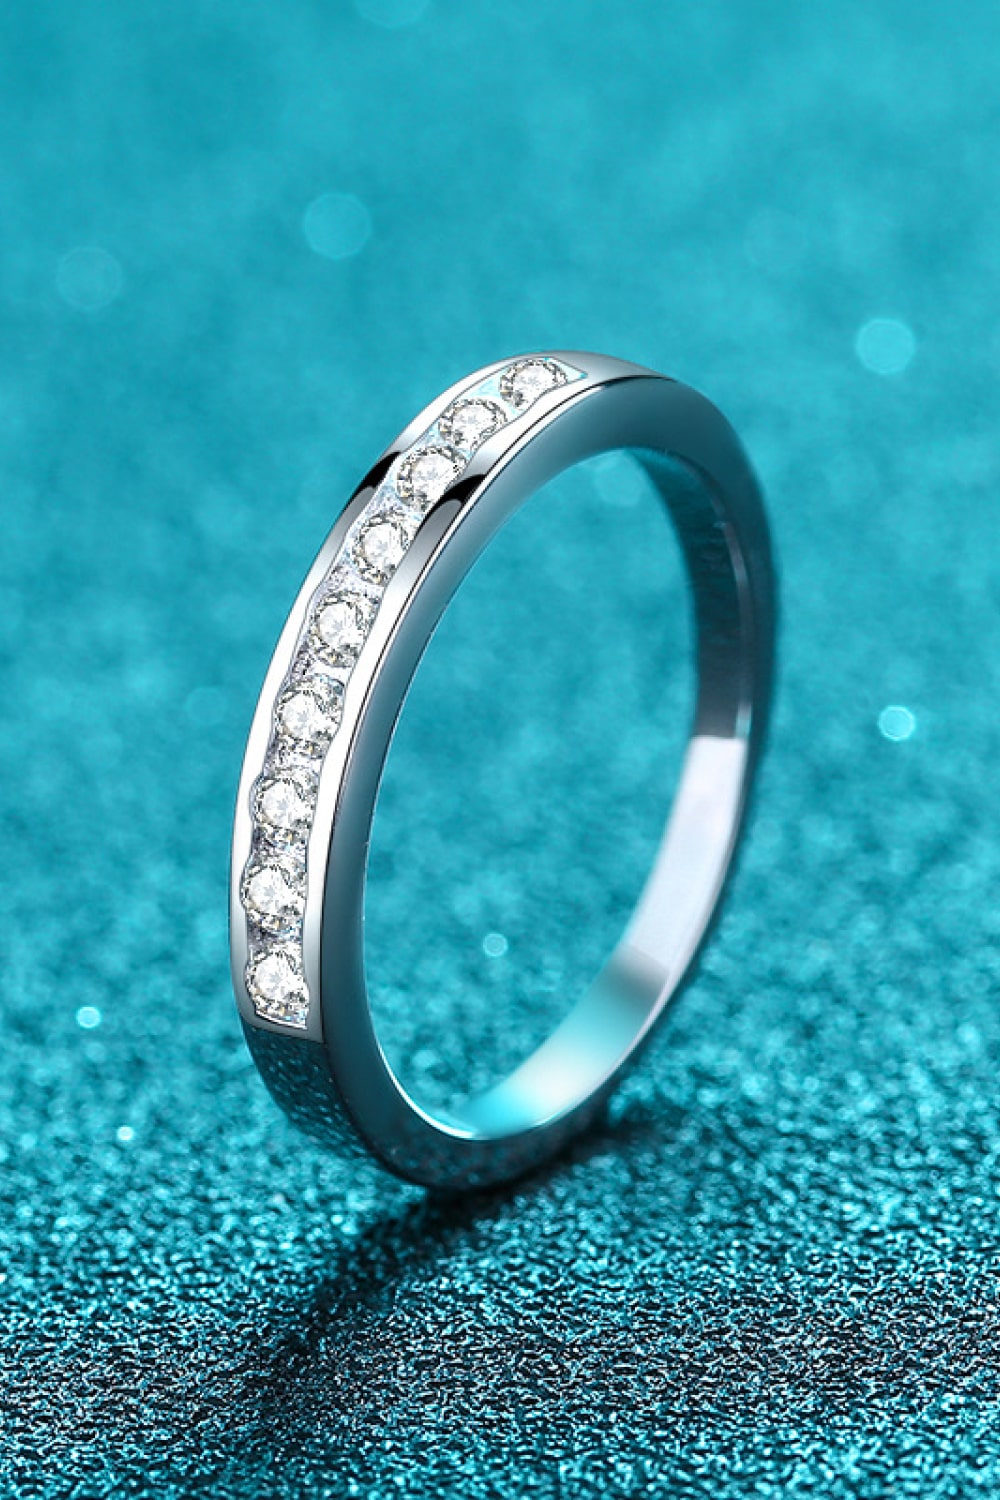 Women’s Have A Little Fun Moissanite Ring